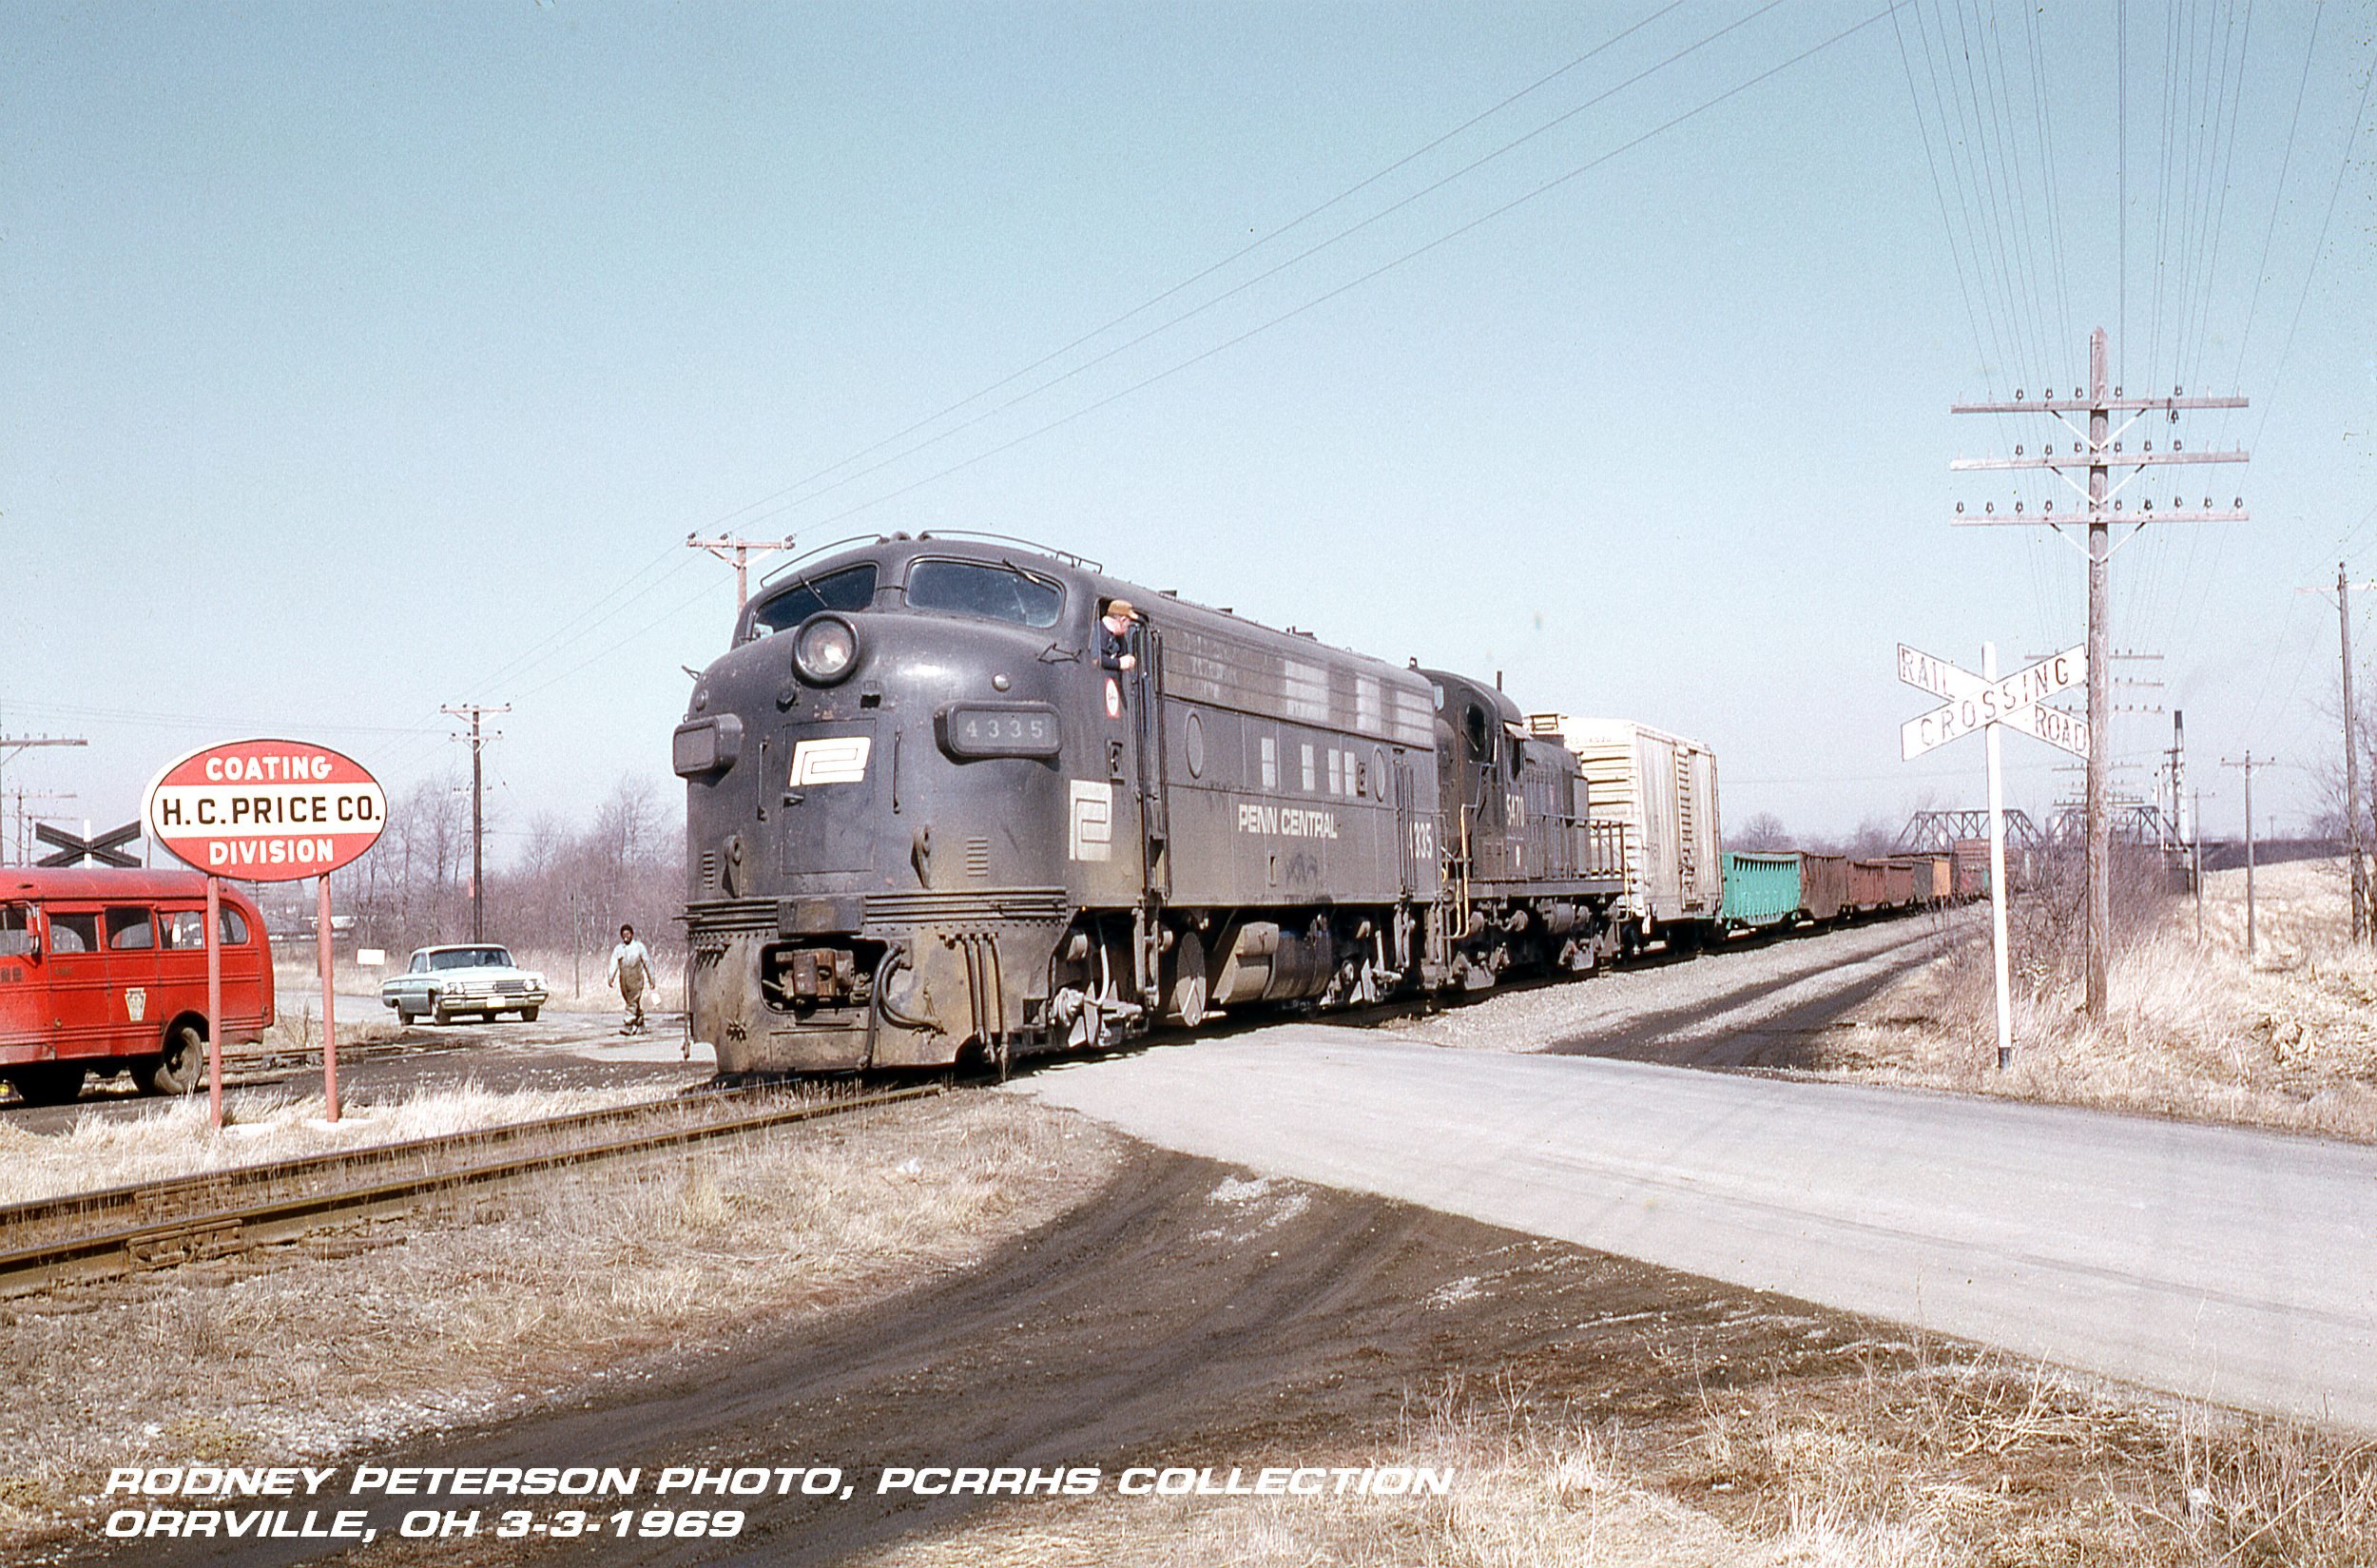   PRESERVING THE HISTORY OF PENN CENTRAL    